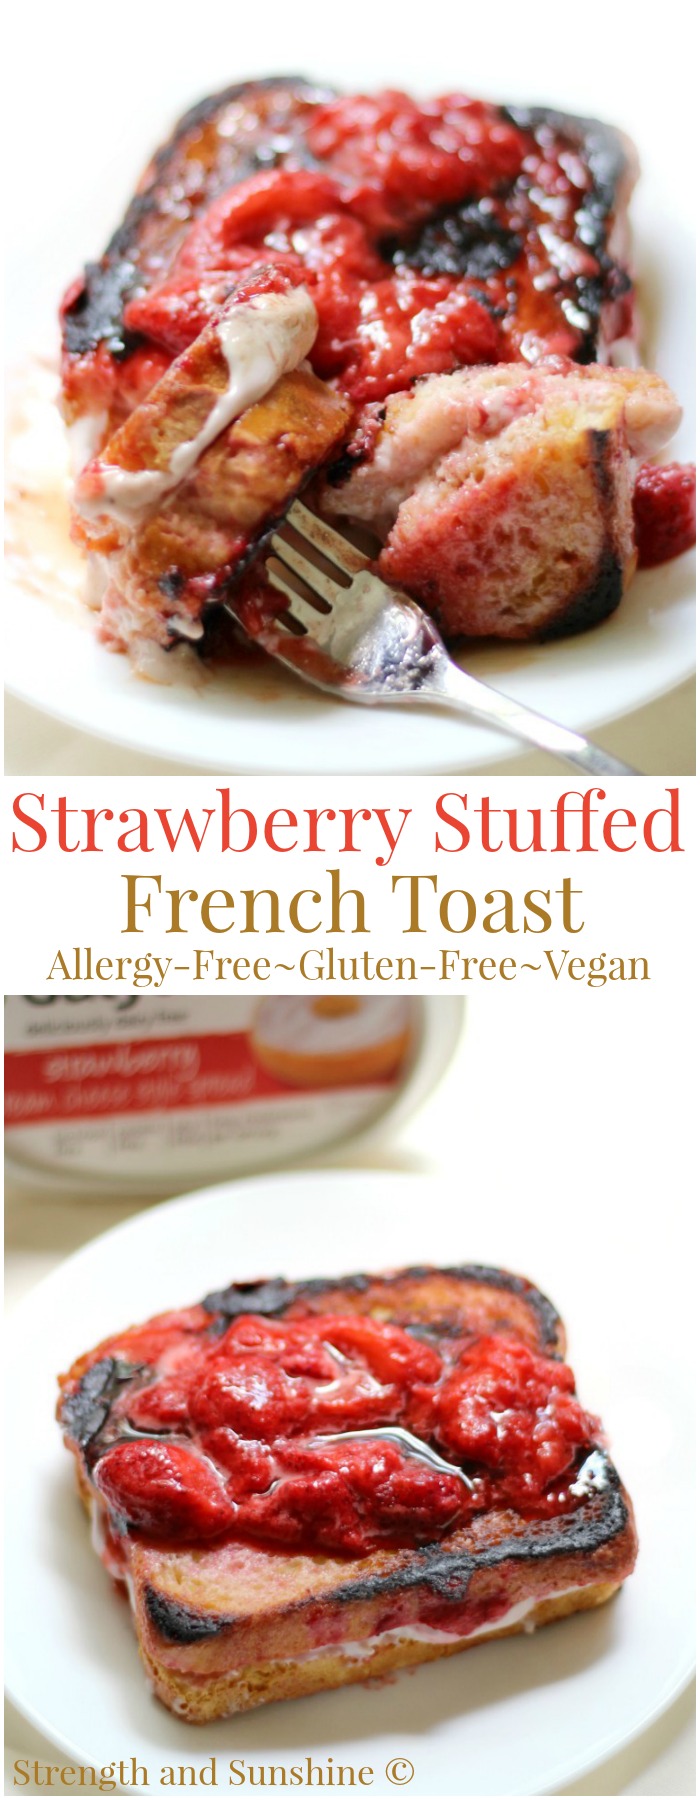 Gluten-Free Strawberry Stuffed French Toast (Vegan, Allergy-Free) | Strength and Sunshine @RebeccaGF666 A French toast recipe that's just a bit more special! Gluten-Free Strawberry Stuffed French Toast that's vegan, top 8 allergy-free, and a breakfast loaded with strawberry topping and dairy-free strawberry cream cheese!